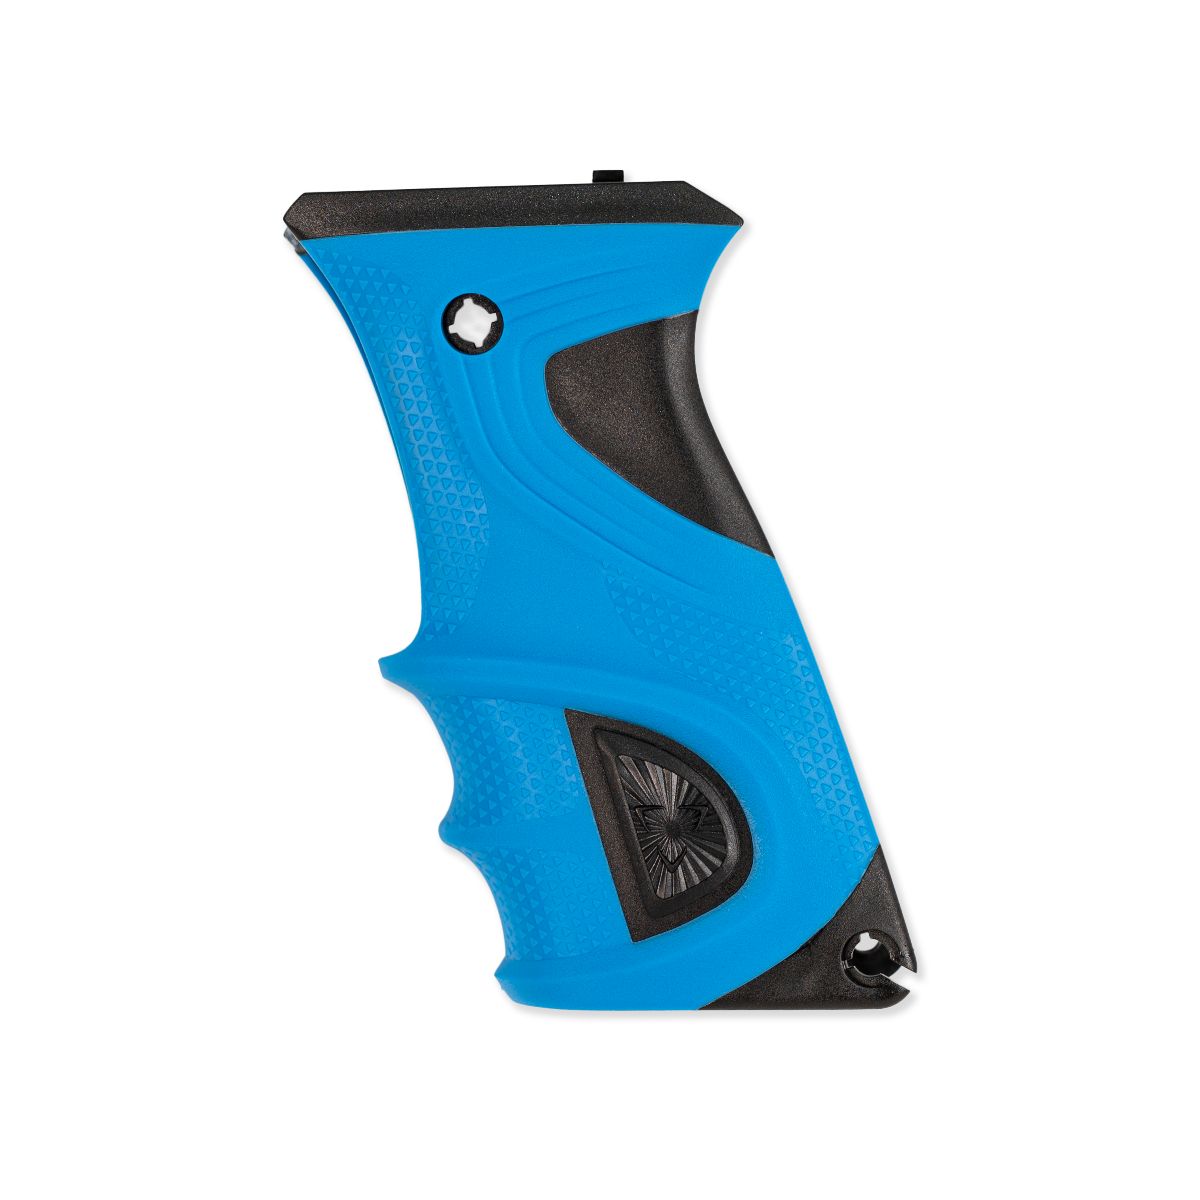 DLX Luxe TM40 Colored Grip - Blue